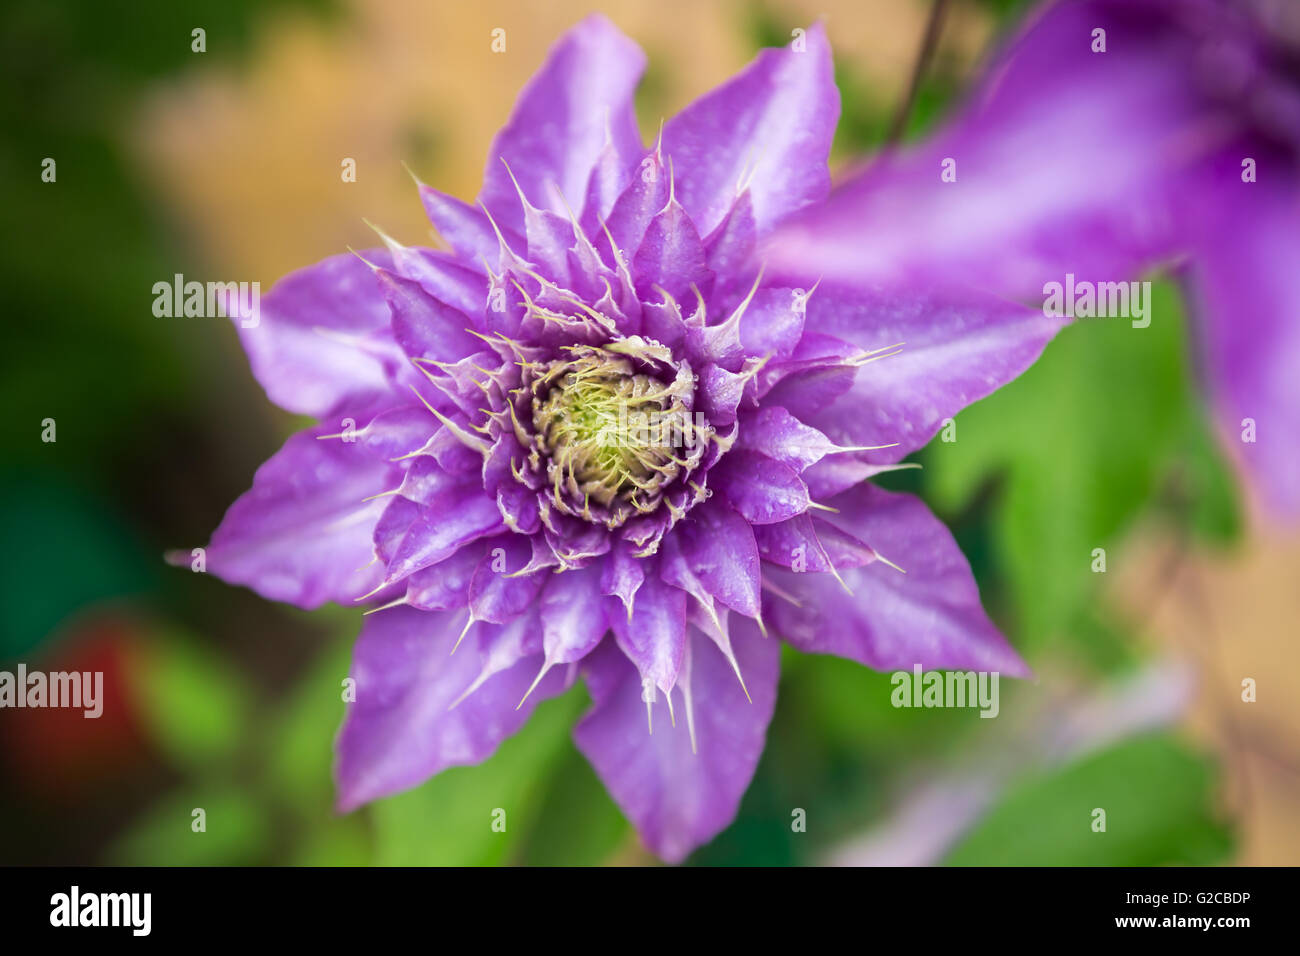 Close up photo of clematis purple flower Stock Photo